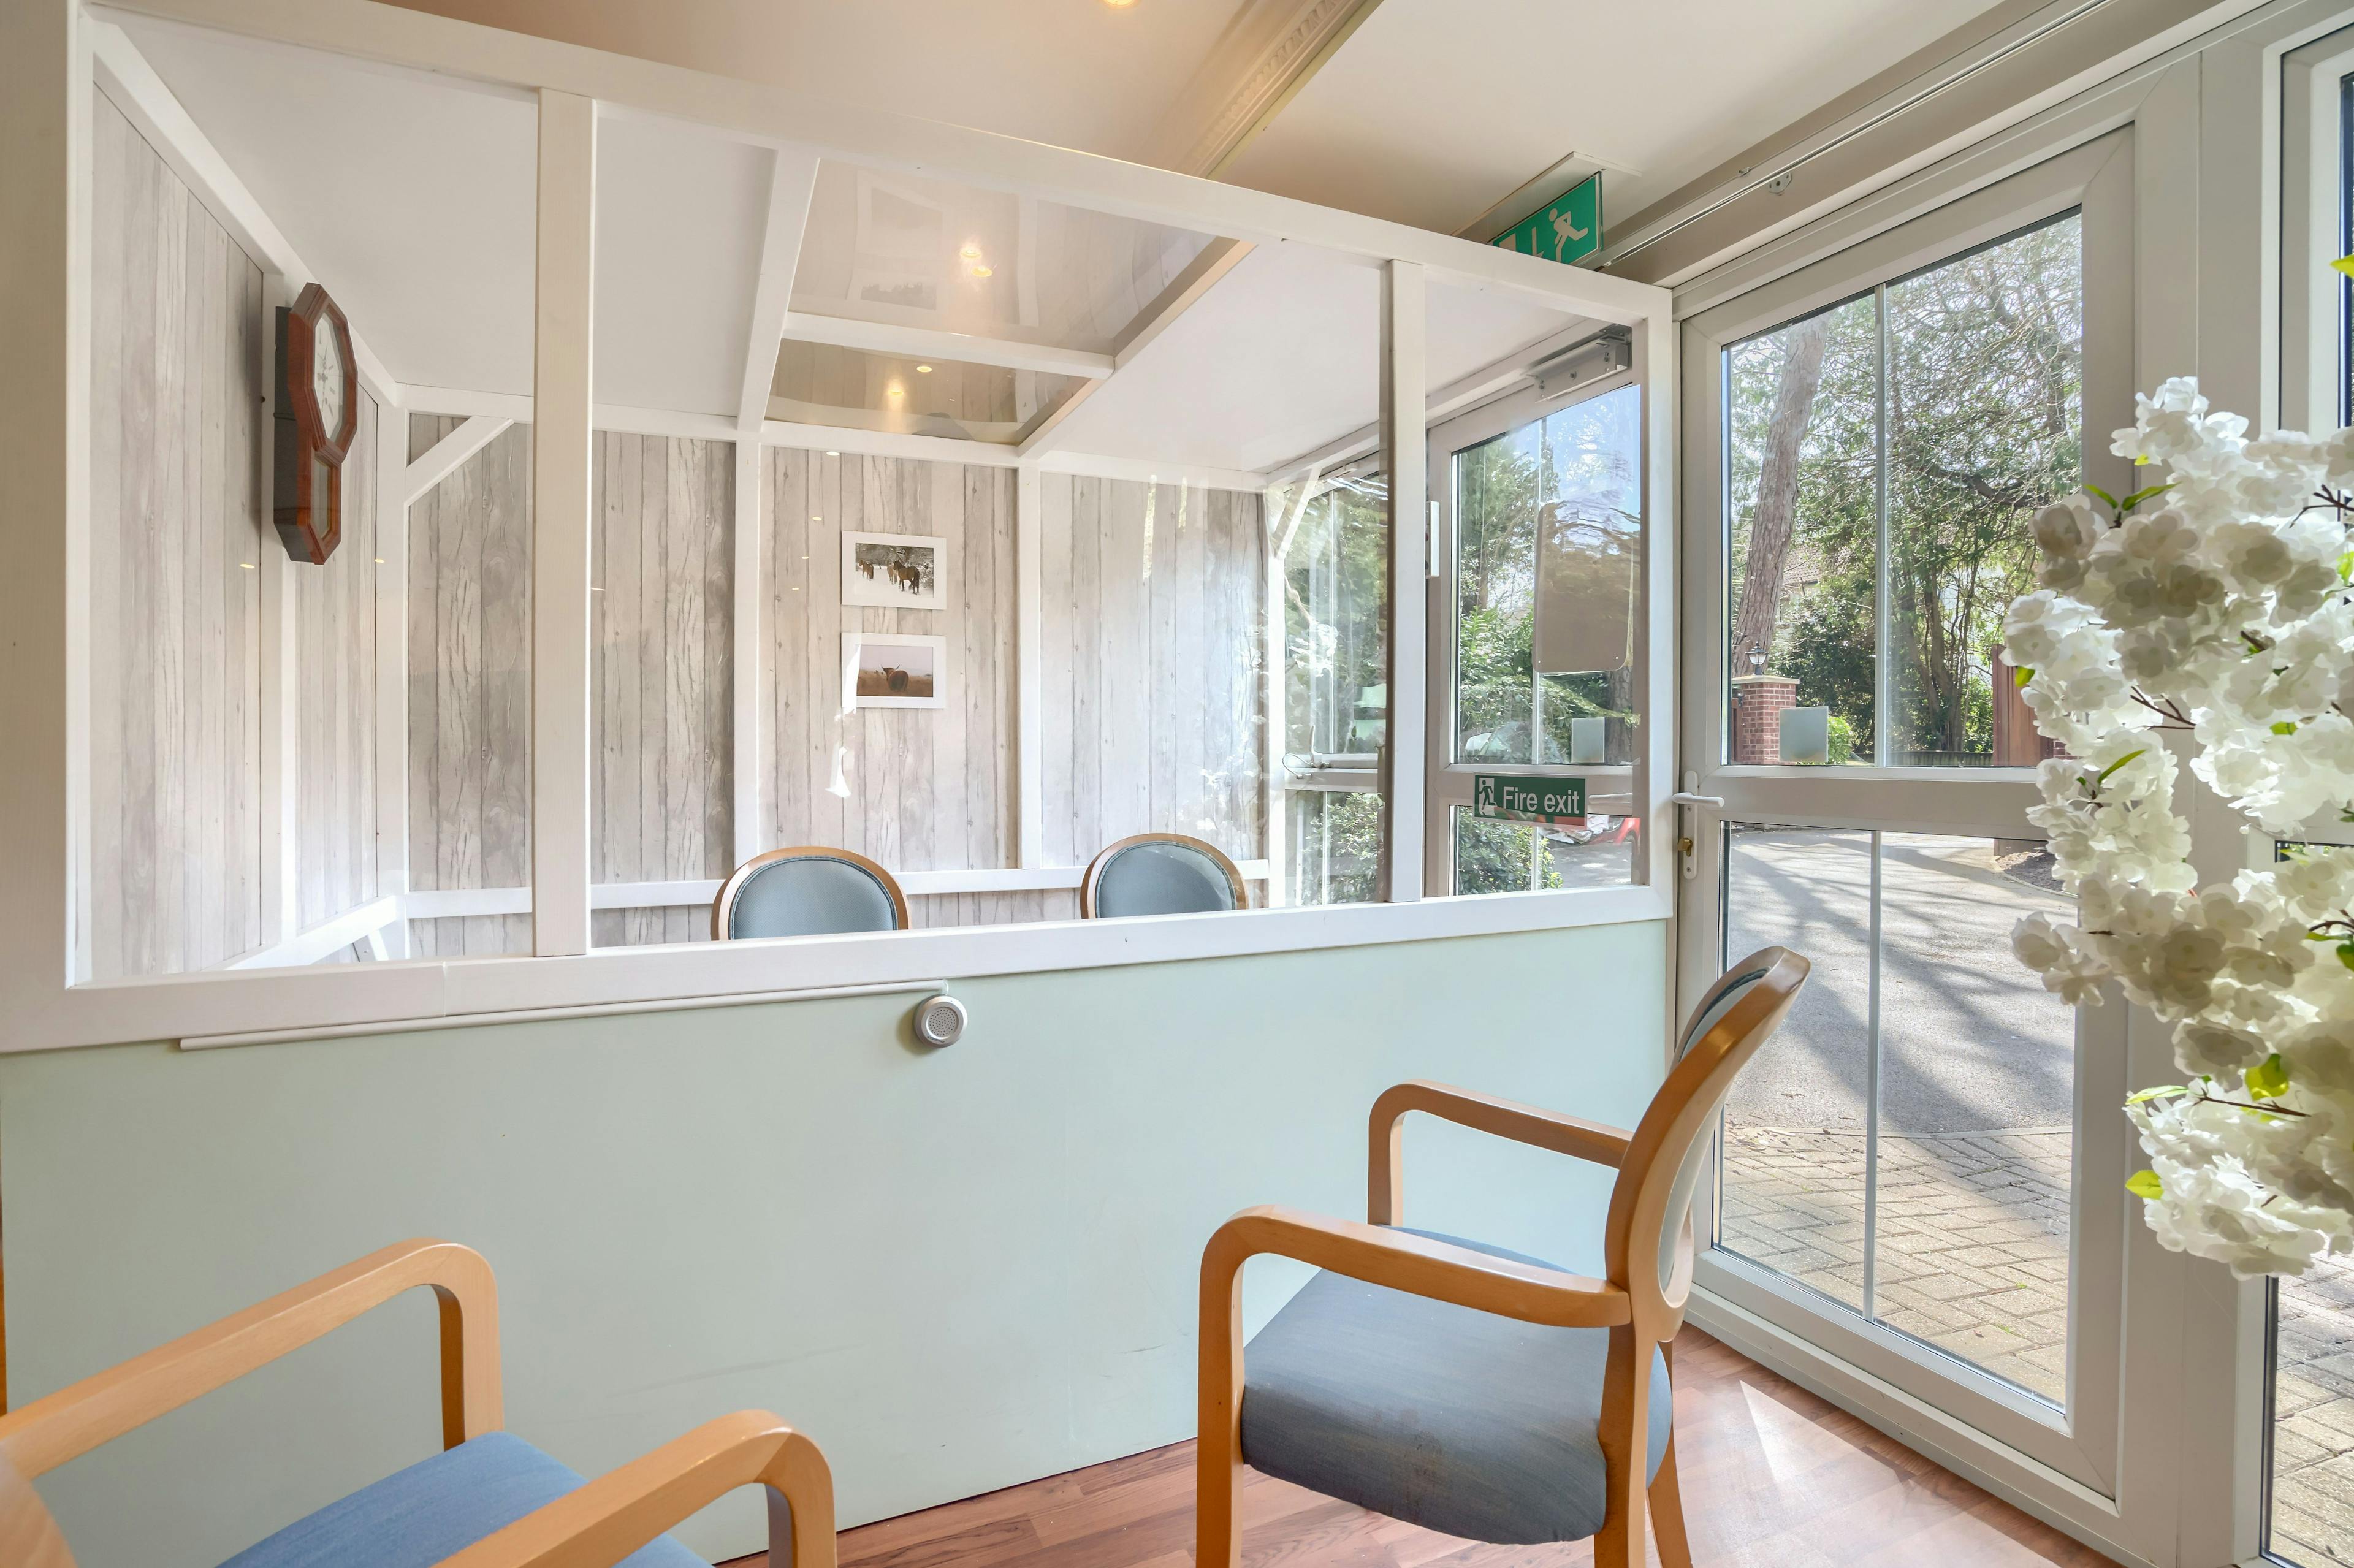 COVID-safe space of Aranlow House Care Home in Poole, Dorset